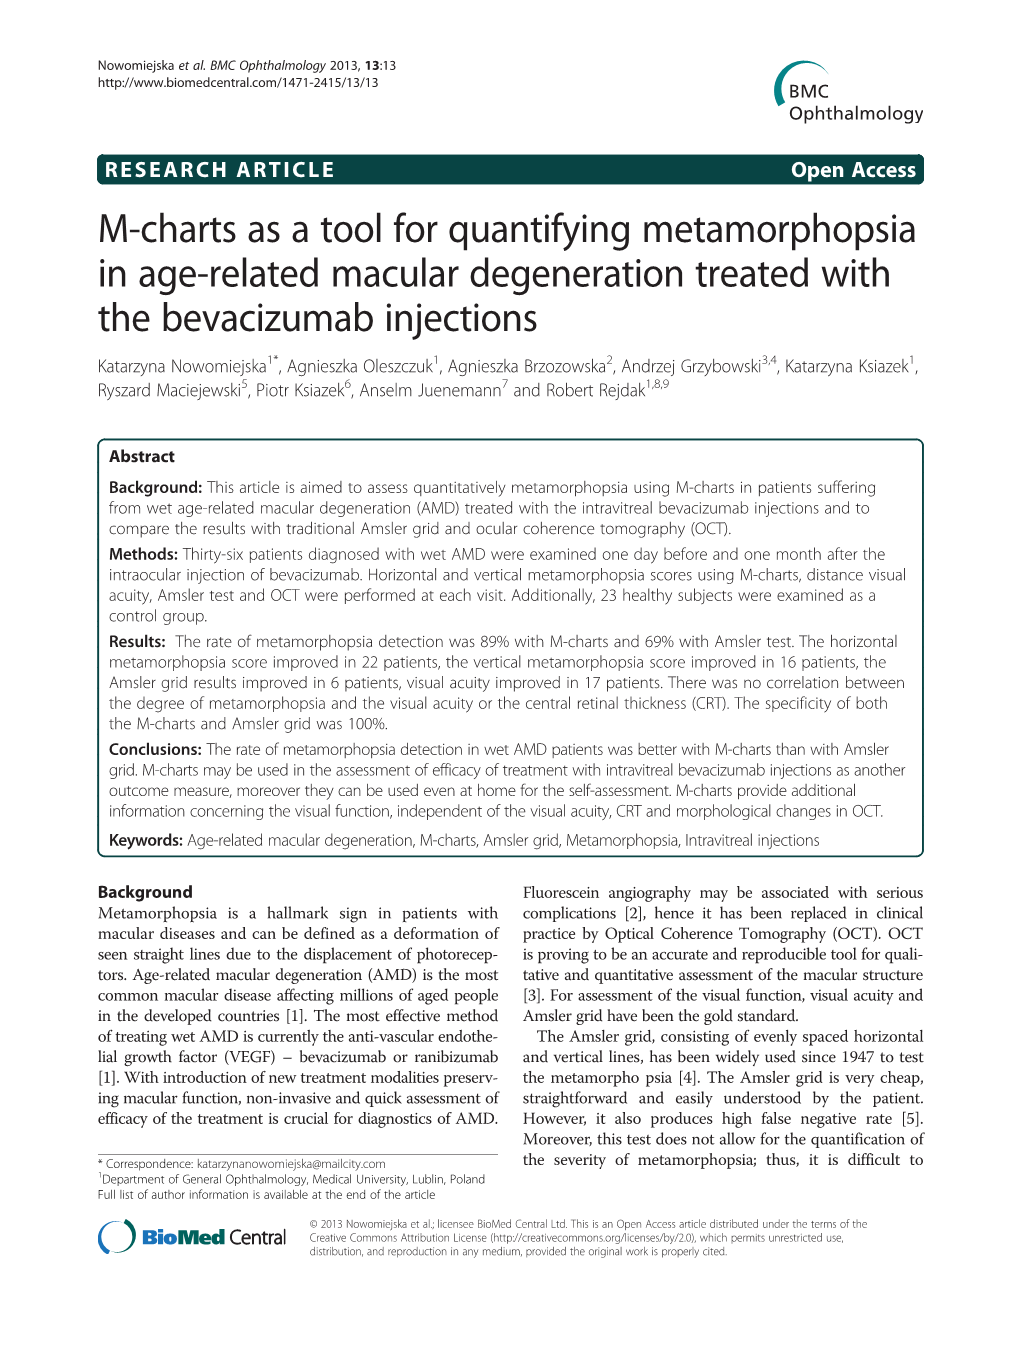 M-Charts As a Tool for Quantifying Metamorphopsia in Age-Related